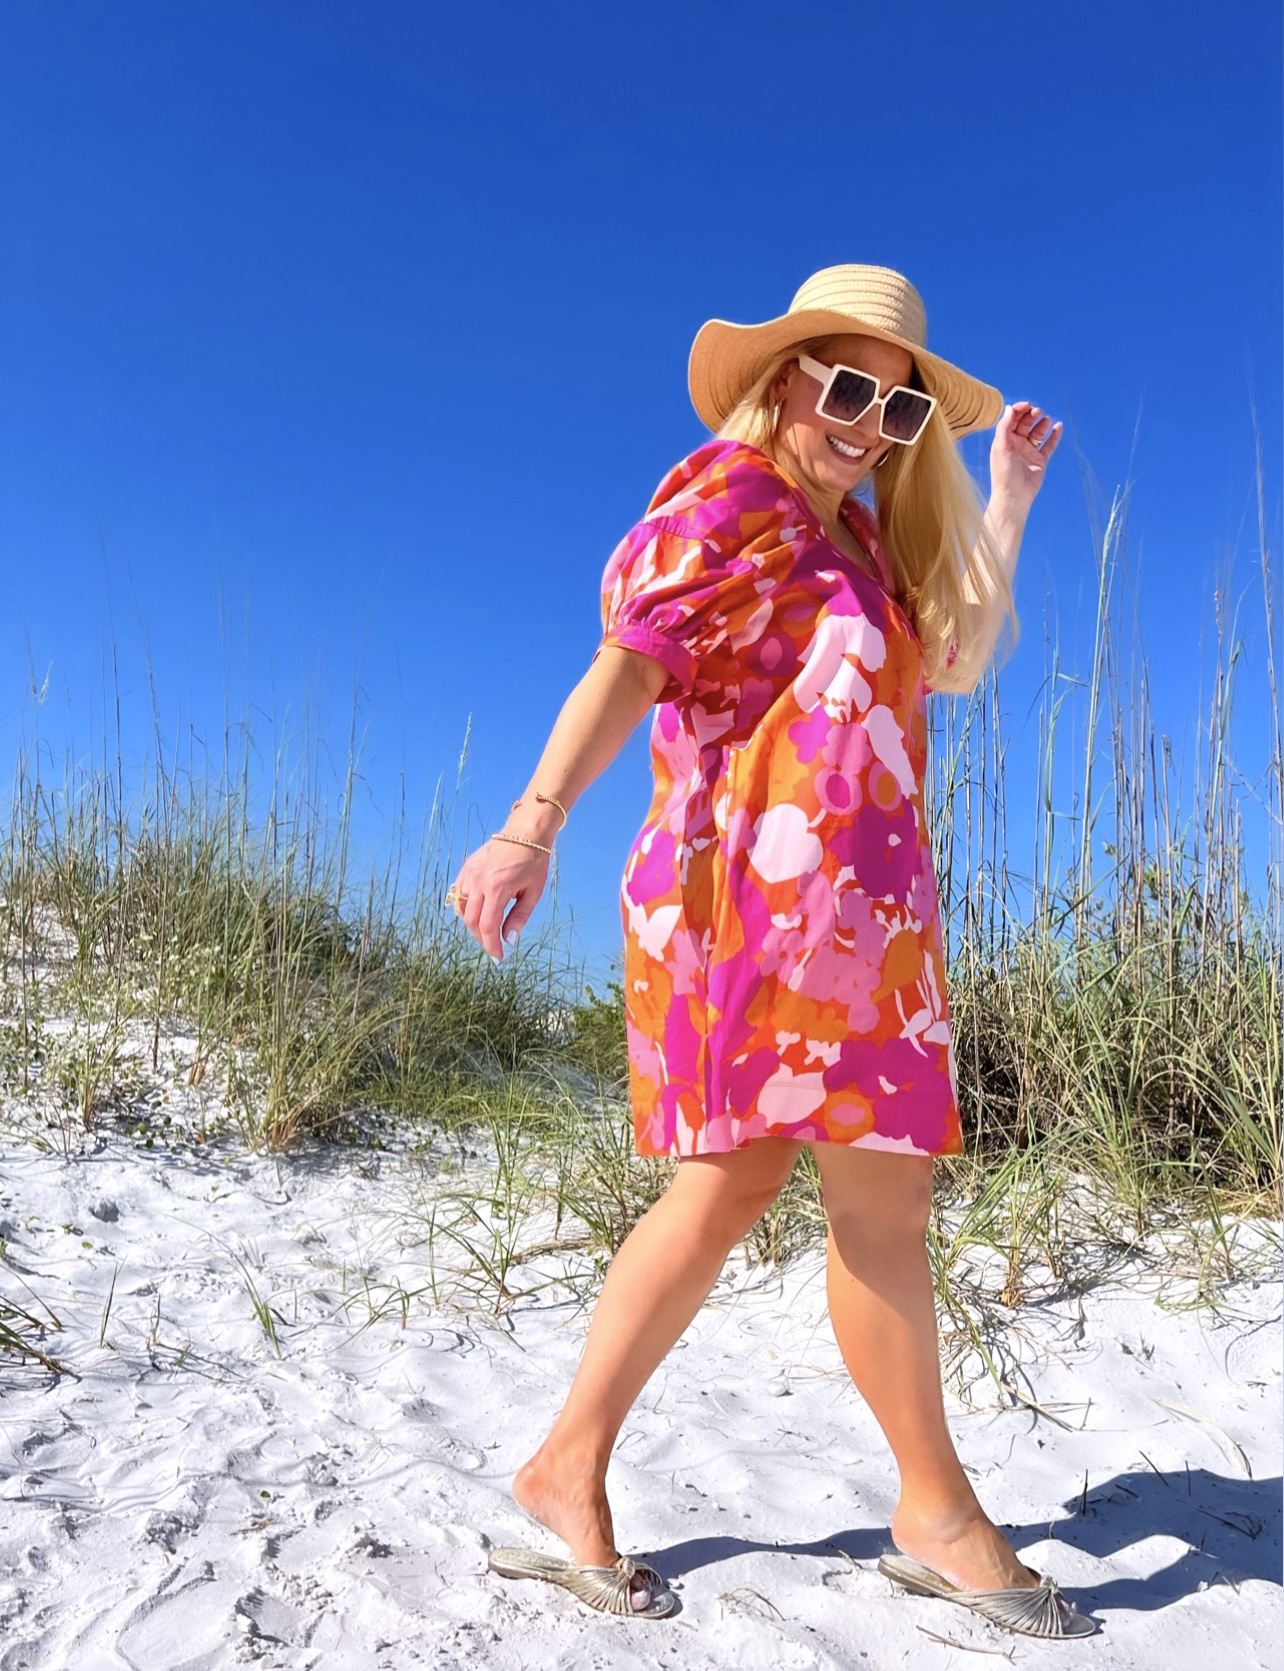 Jenn Truman Fashion Blogger @JTSTJTST11 is walking on the beach in Dunedin Florida while wearing an pink and orange Free Assembly swing dress from Walmart.